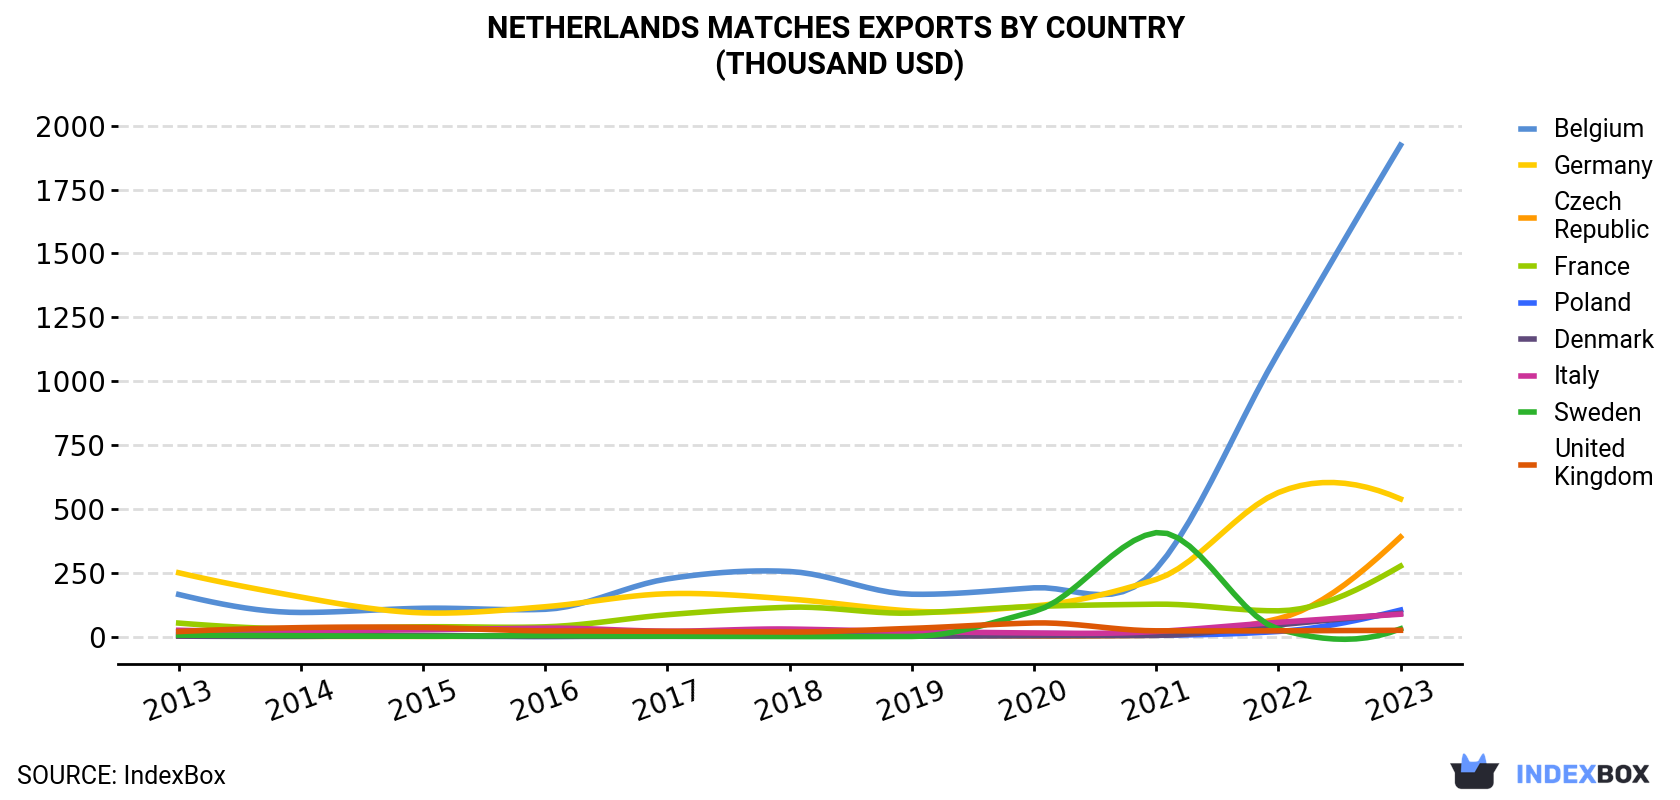 Netherlands Matches Exports By Country (Thousand USD)